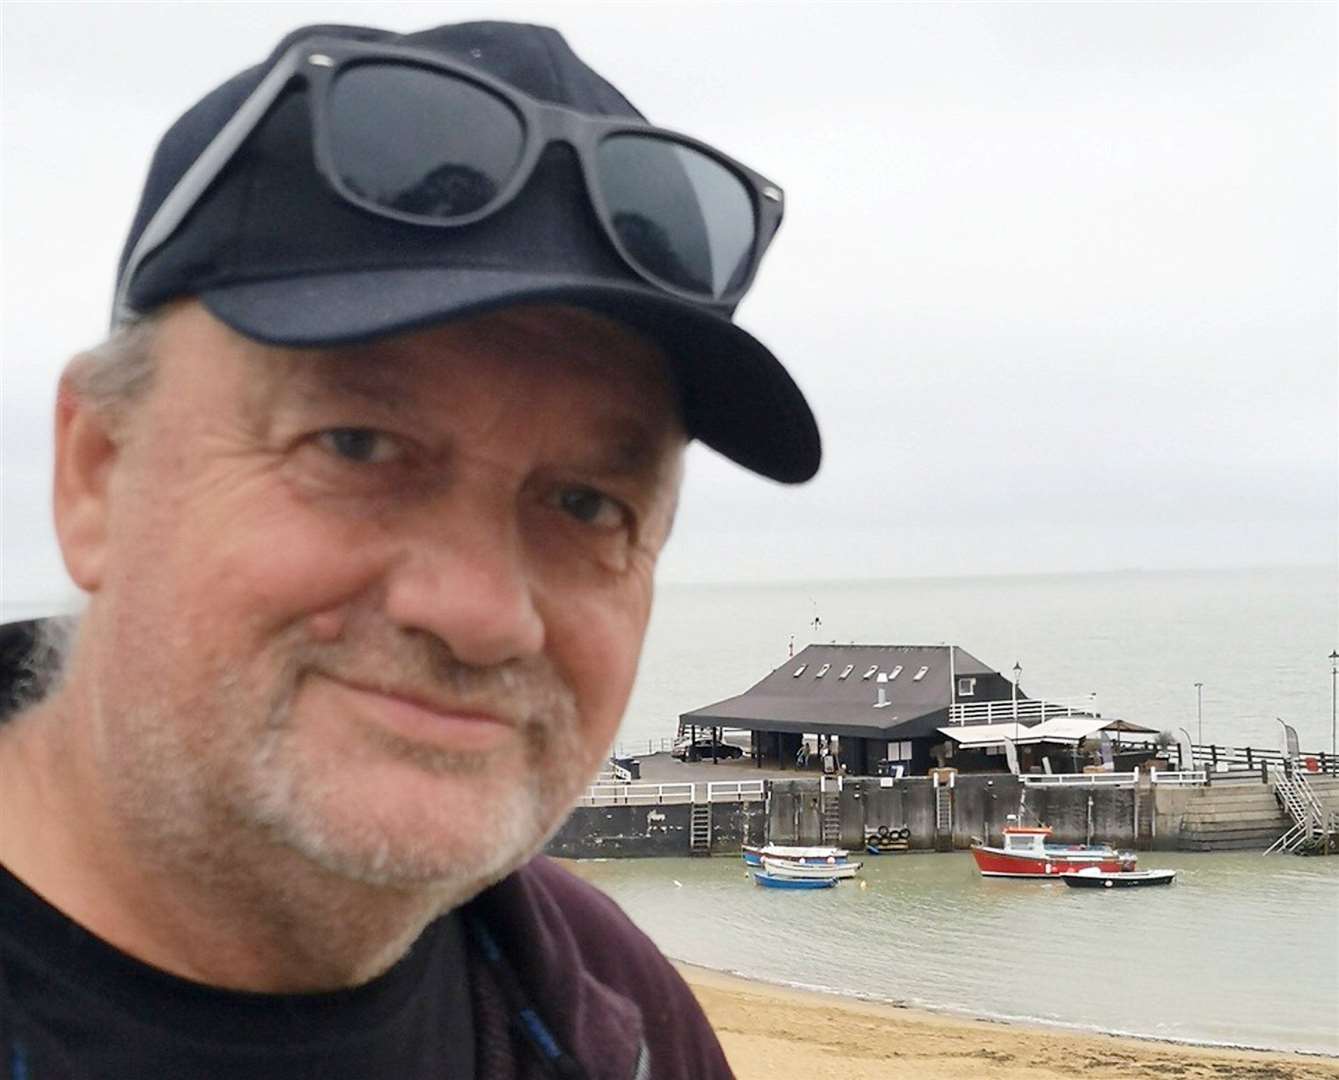 Ramsgate man Gary Evans, 65, works at an amusement park but still cannot afford a home. Picture: SWNS